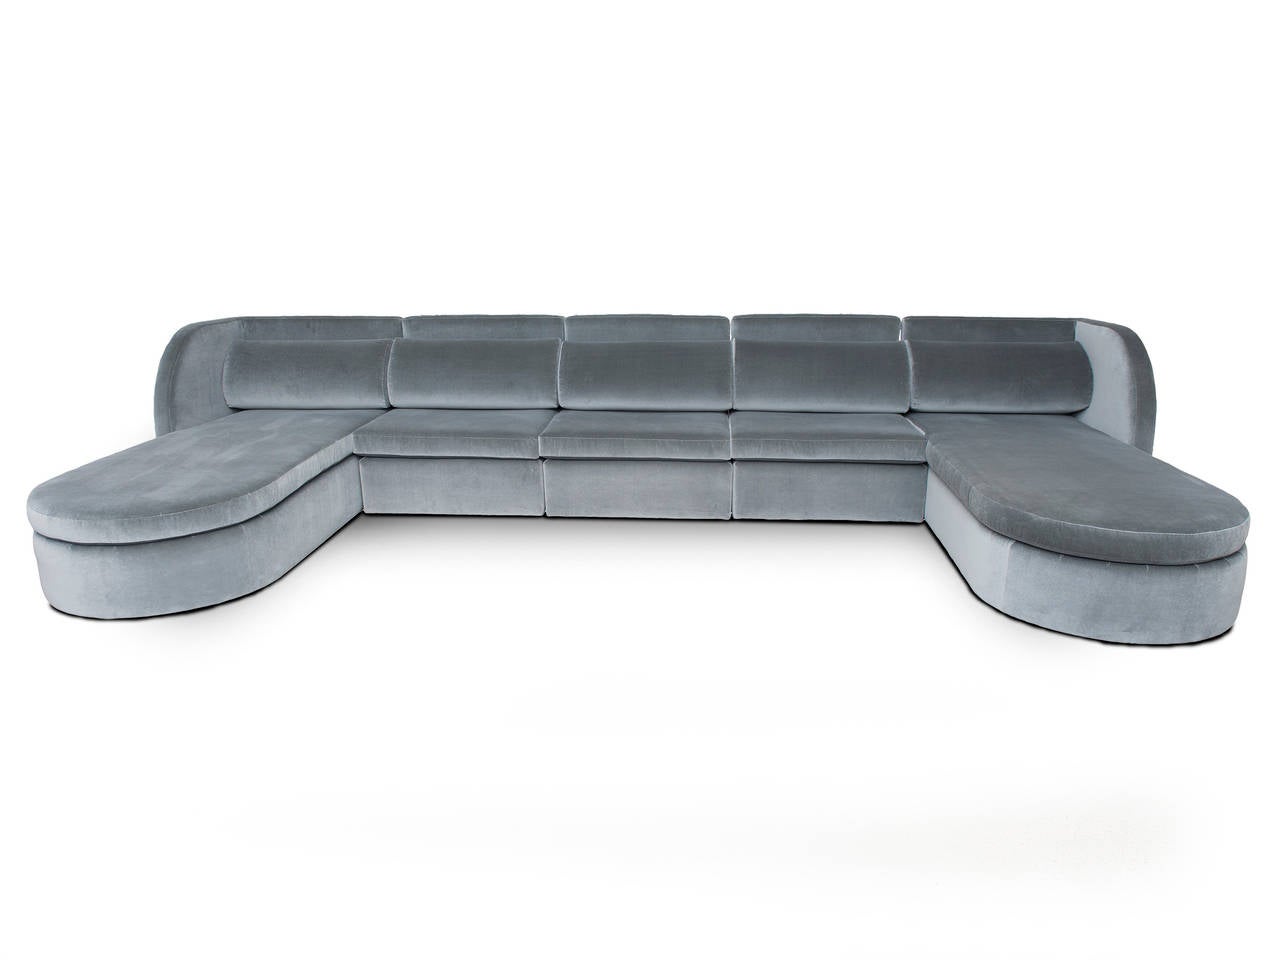 Highly stylized unique sectional by Milo Baughman for Thayer Coggin - curvaceous and newly upholstered in luxurious smoky grey velvet.